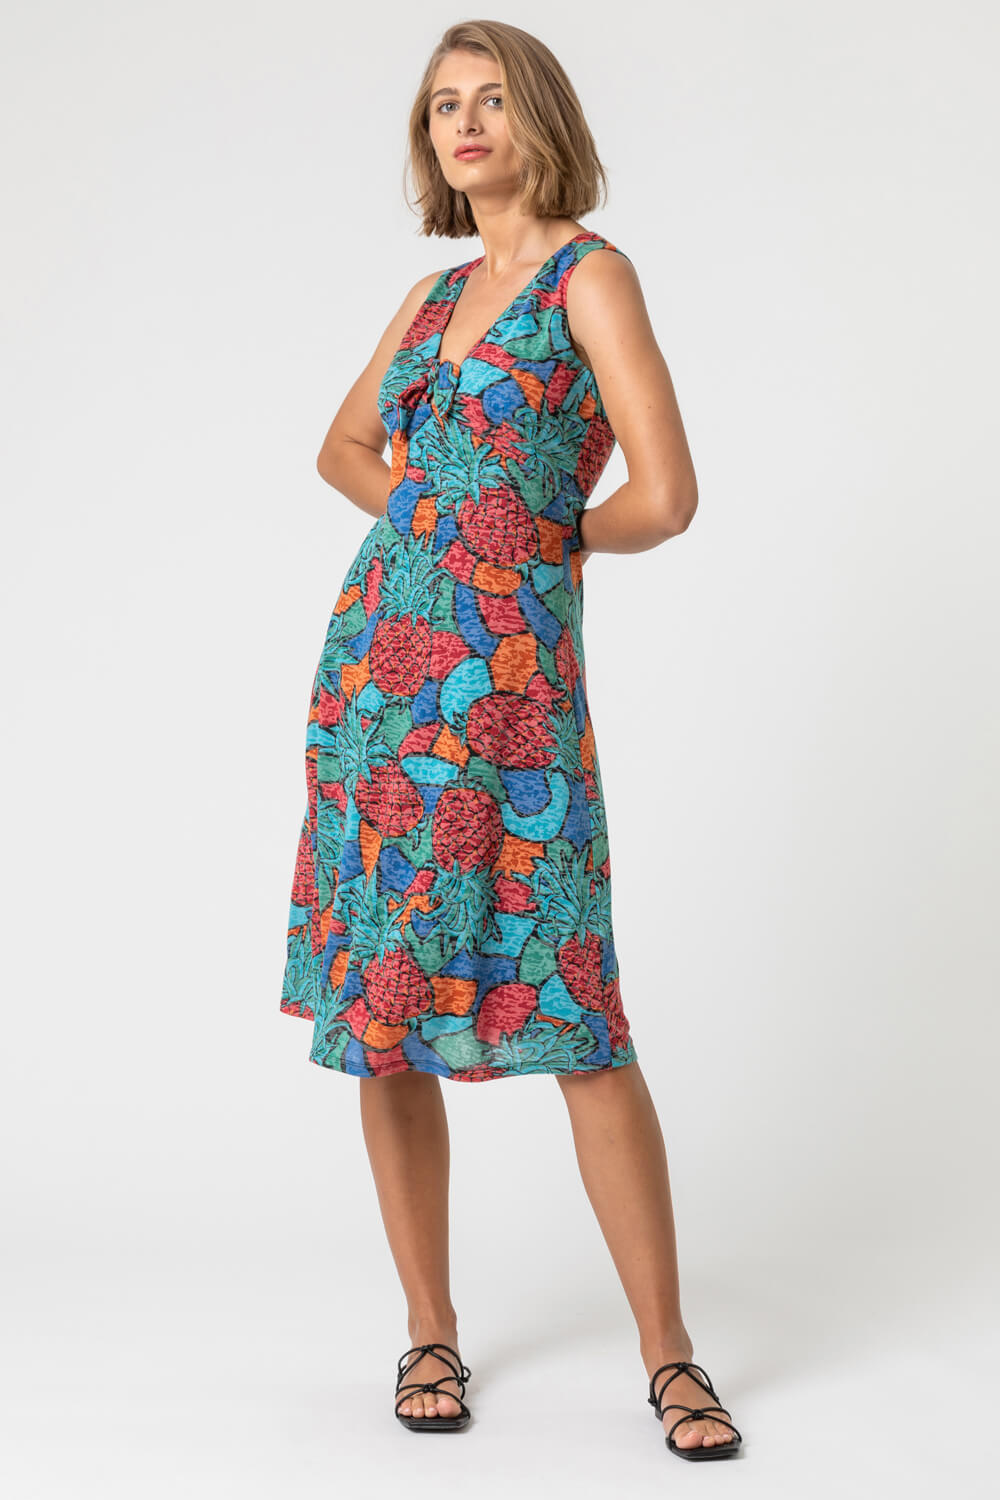 Burnout Pineapple Print Knotted Dress in Turquoise - Roman Originals UK